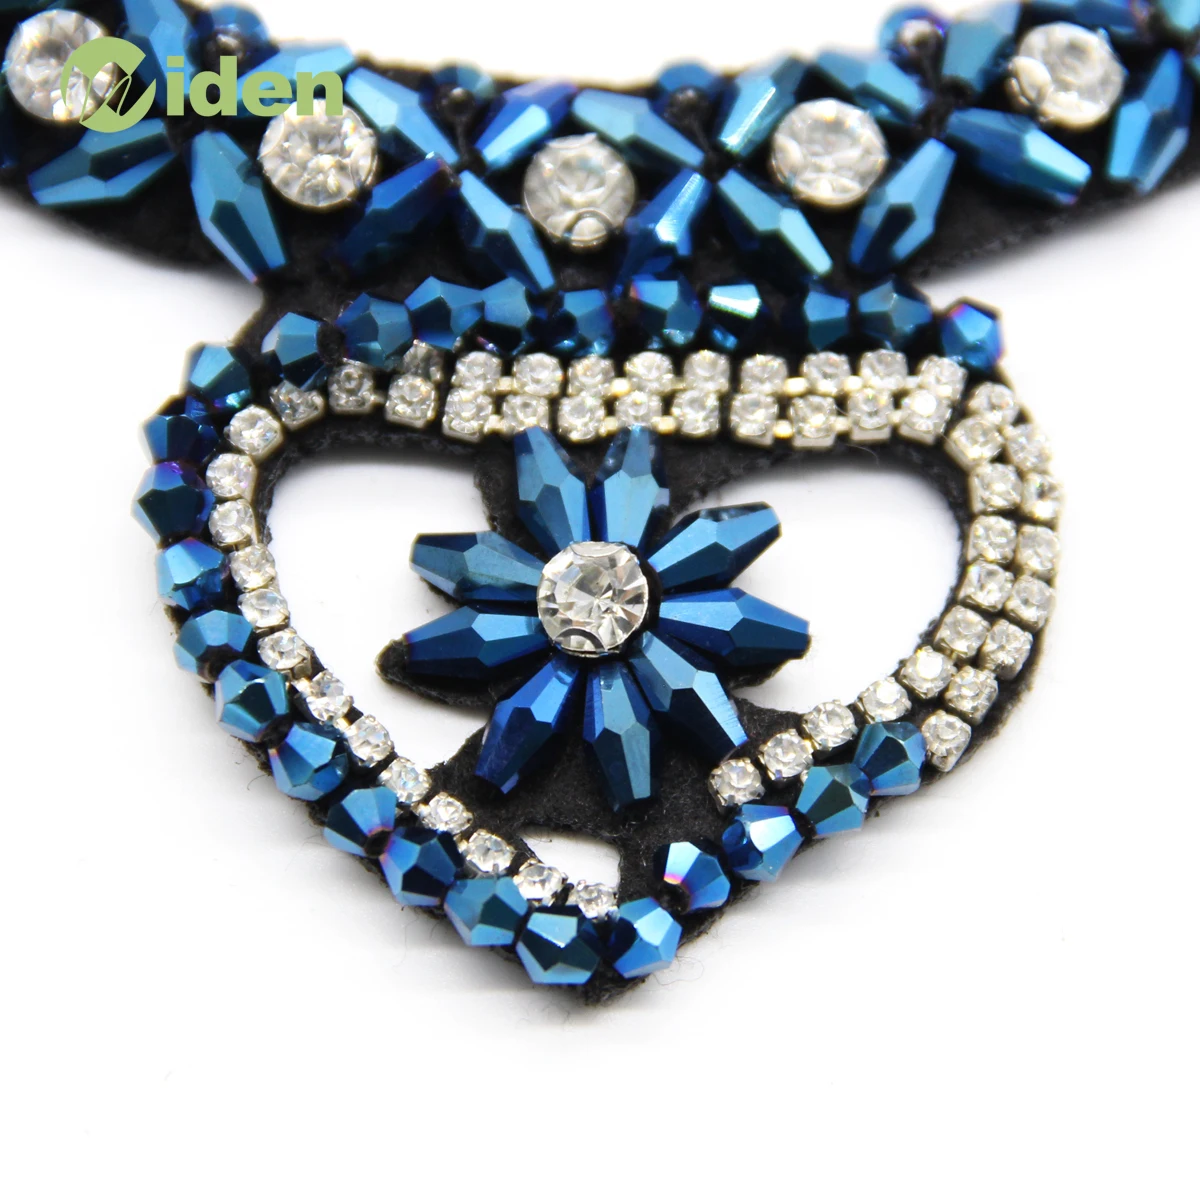 Heart Design Rhinestone Embroidered Beads Collar Neckline Lace Trimming